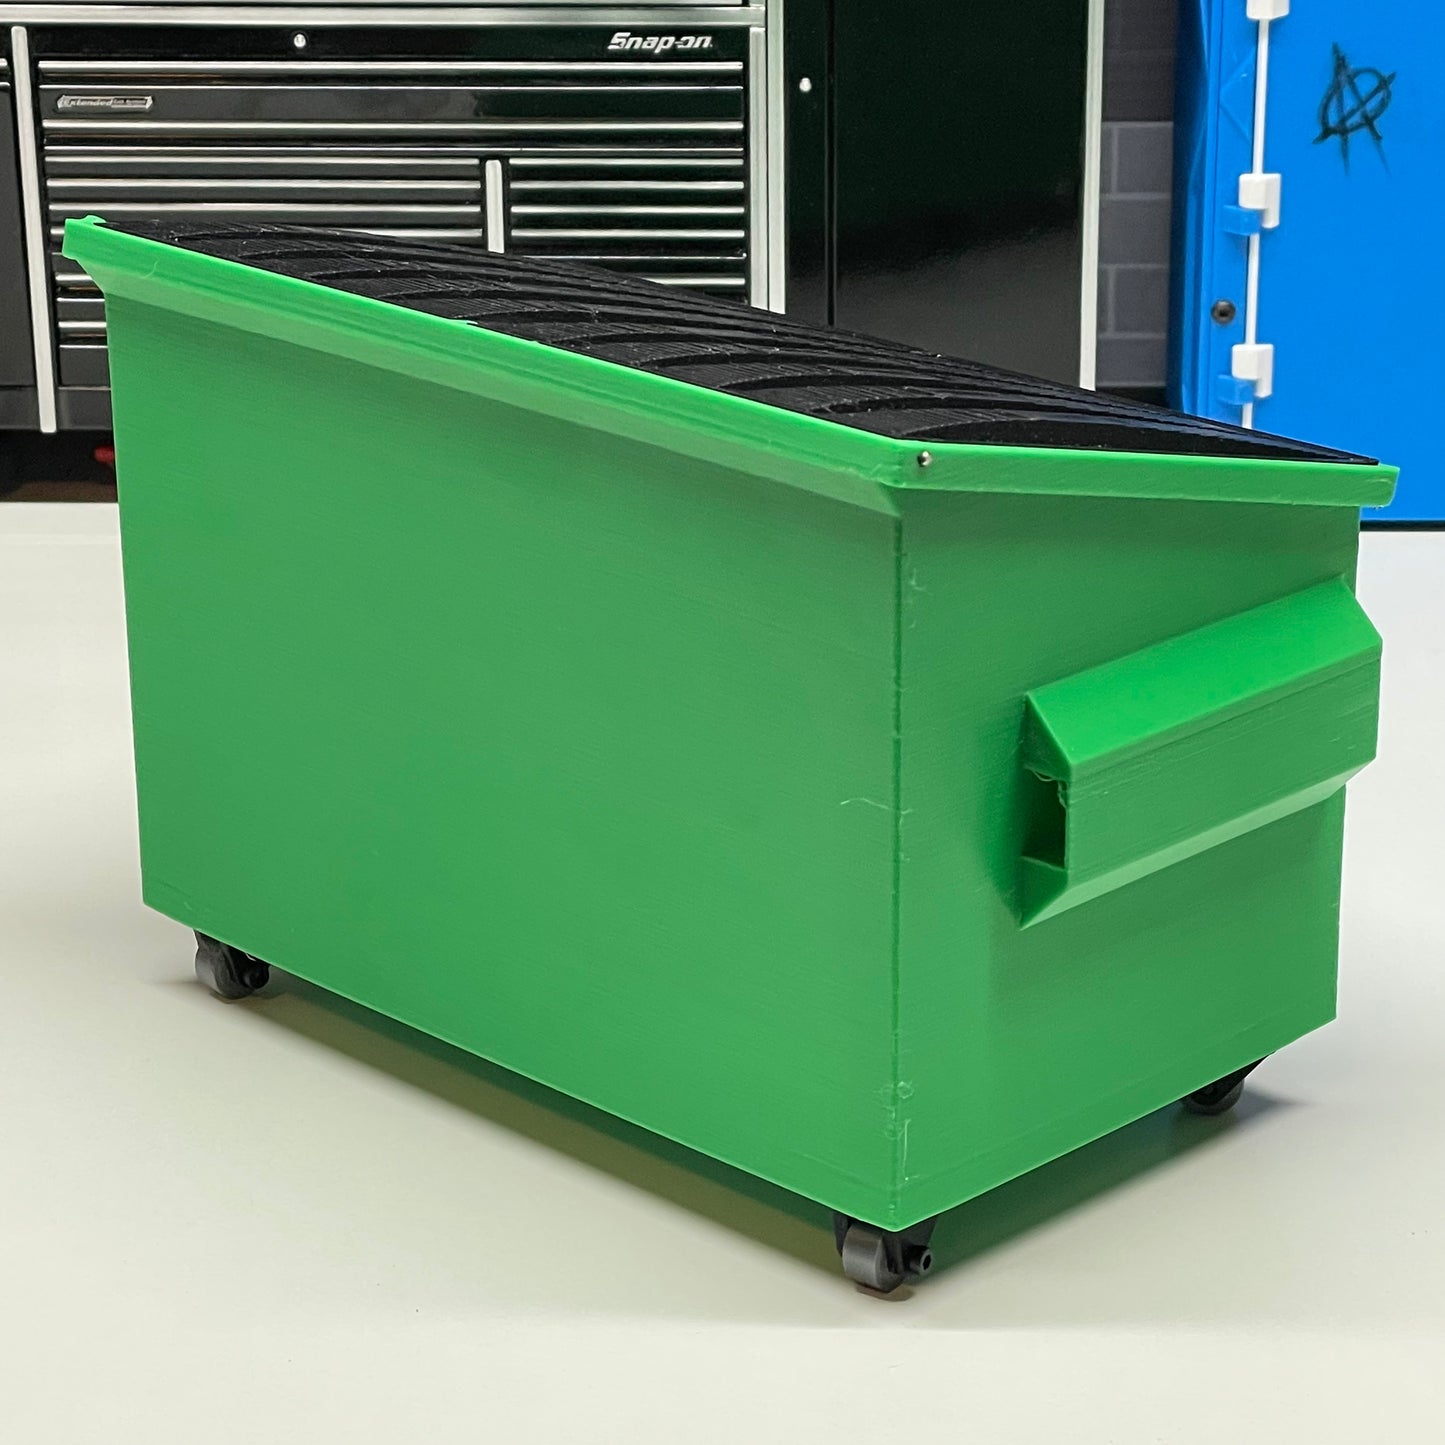 1/10 Scale "Mini MegaDump 6000" Trash Dumpster w/Working Casters, Rubberized Lids and True Scale Sizing